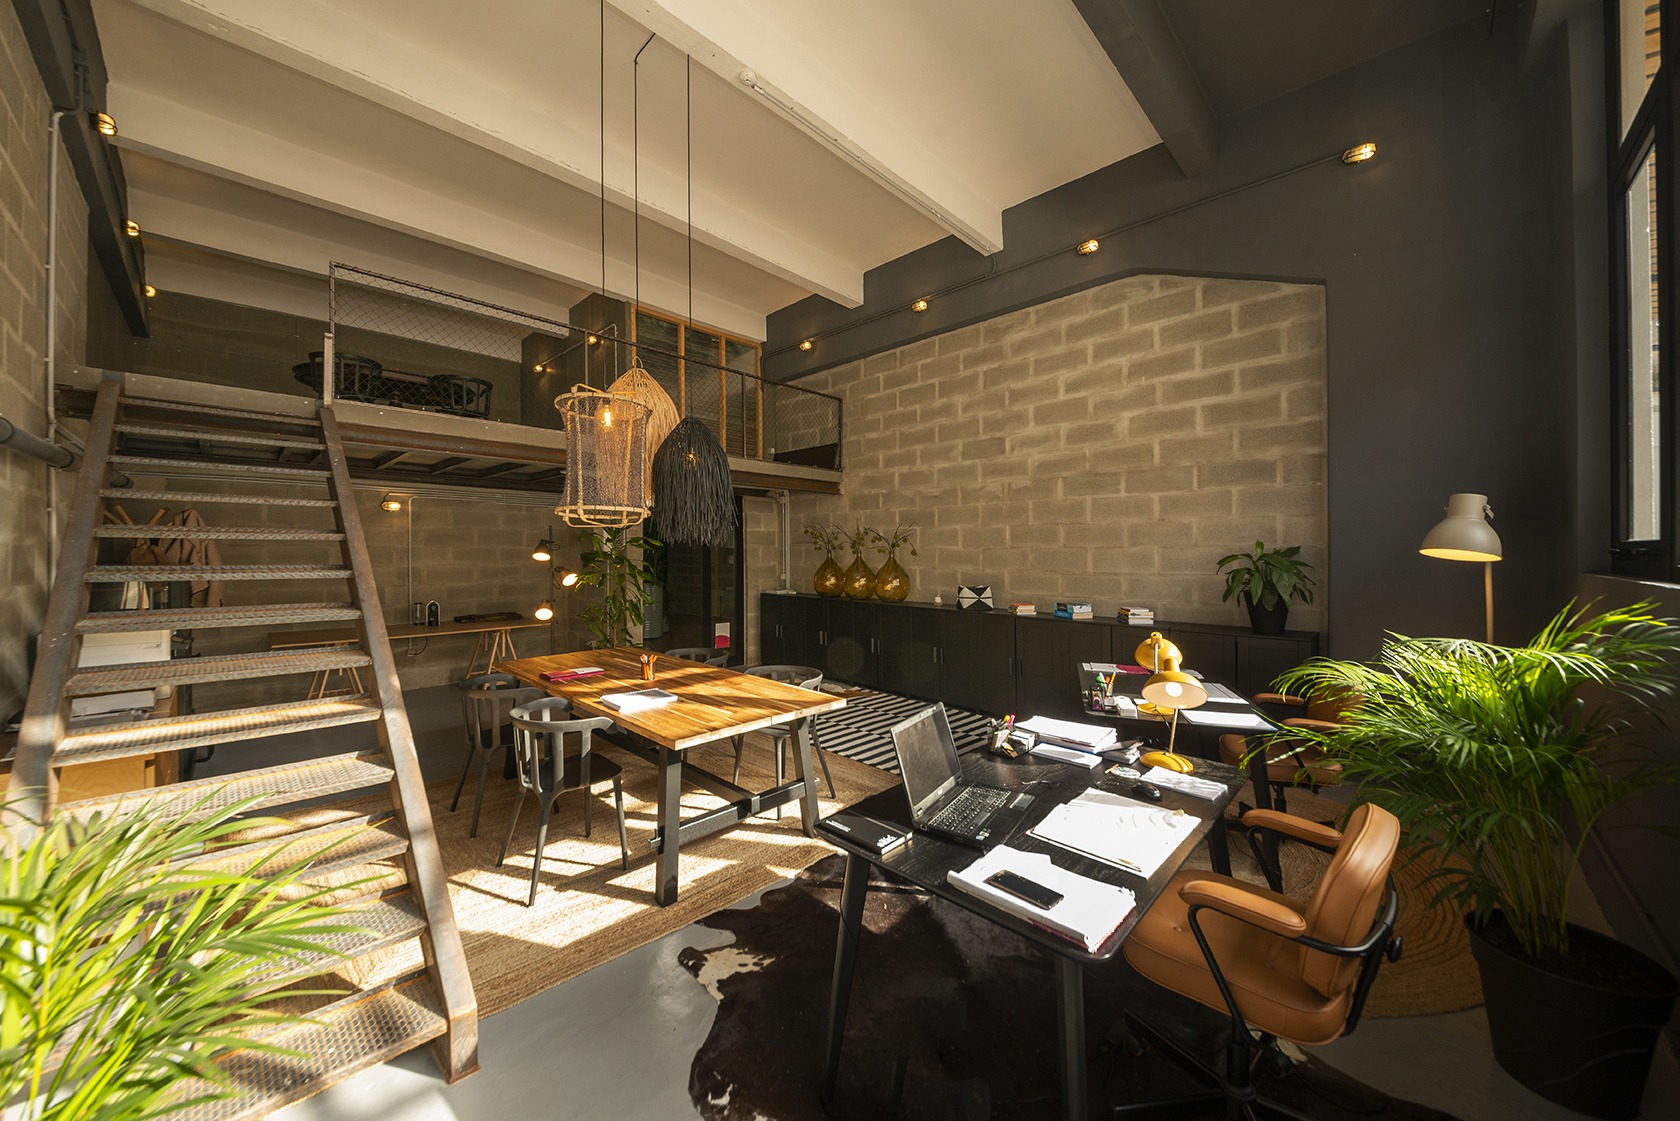 sitio created private office spaces with an industrial style